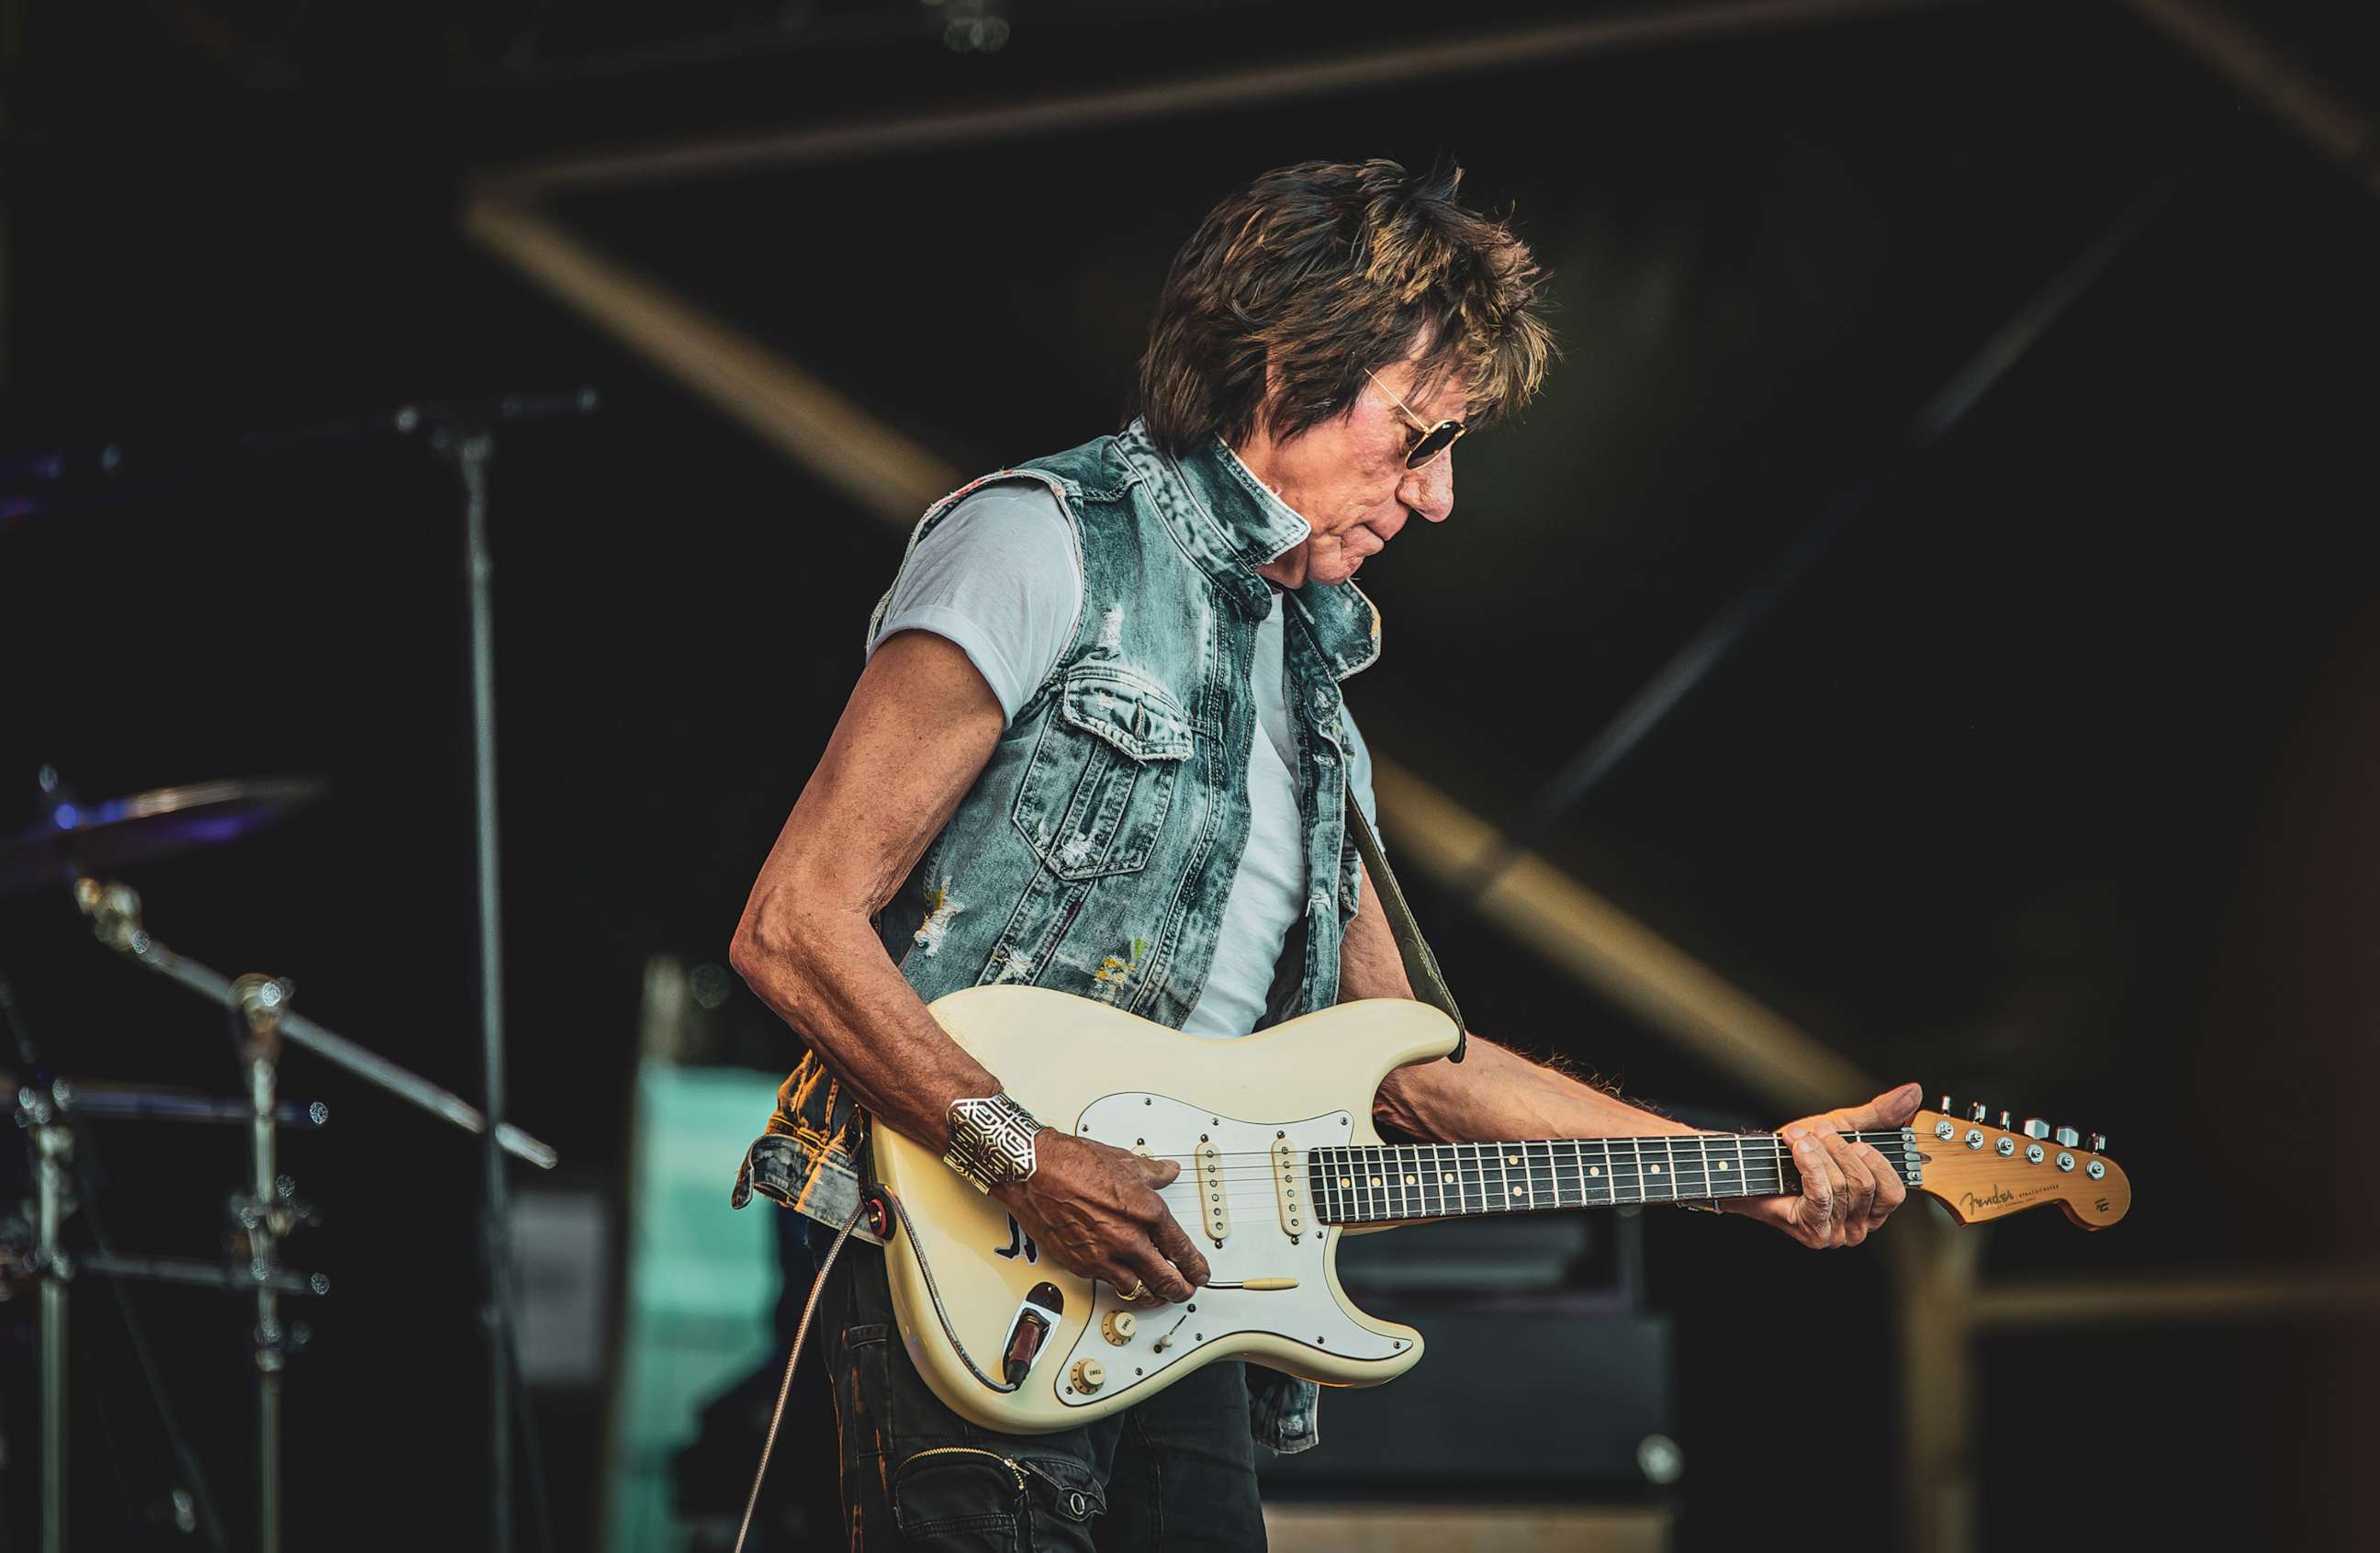 PHOTO: In this June 19, 2022, file photo, Jeff Beck performs during the Helsinki Blues Festival in Helsinki, Finland.